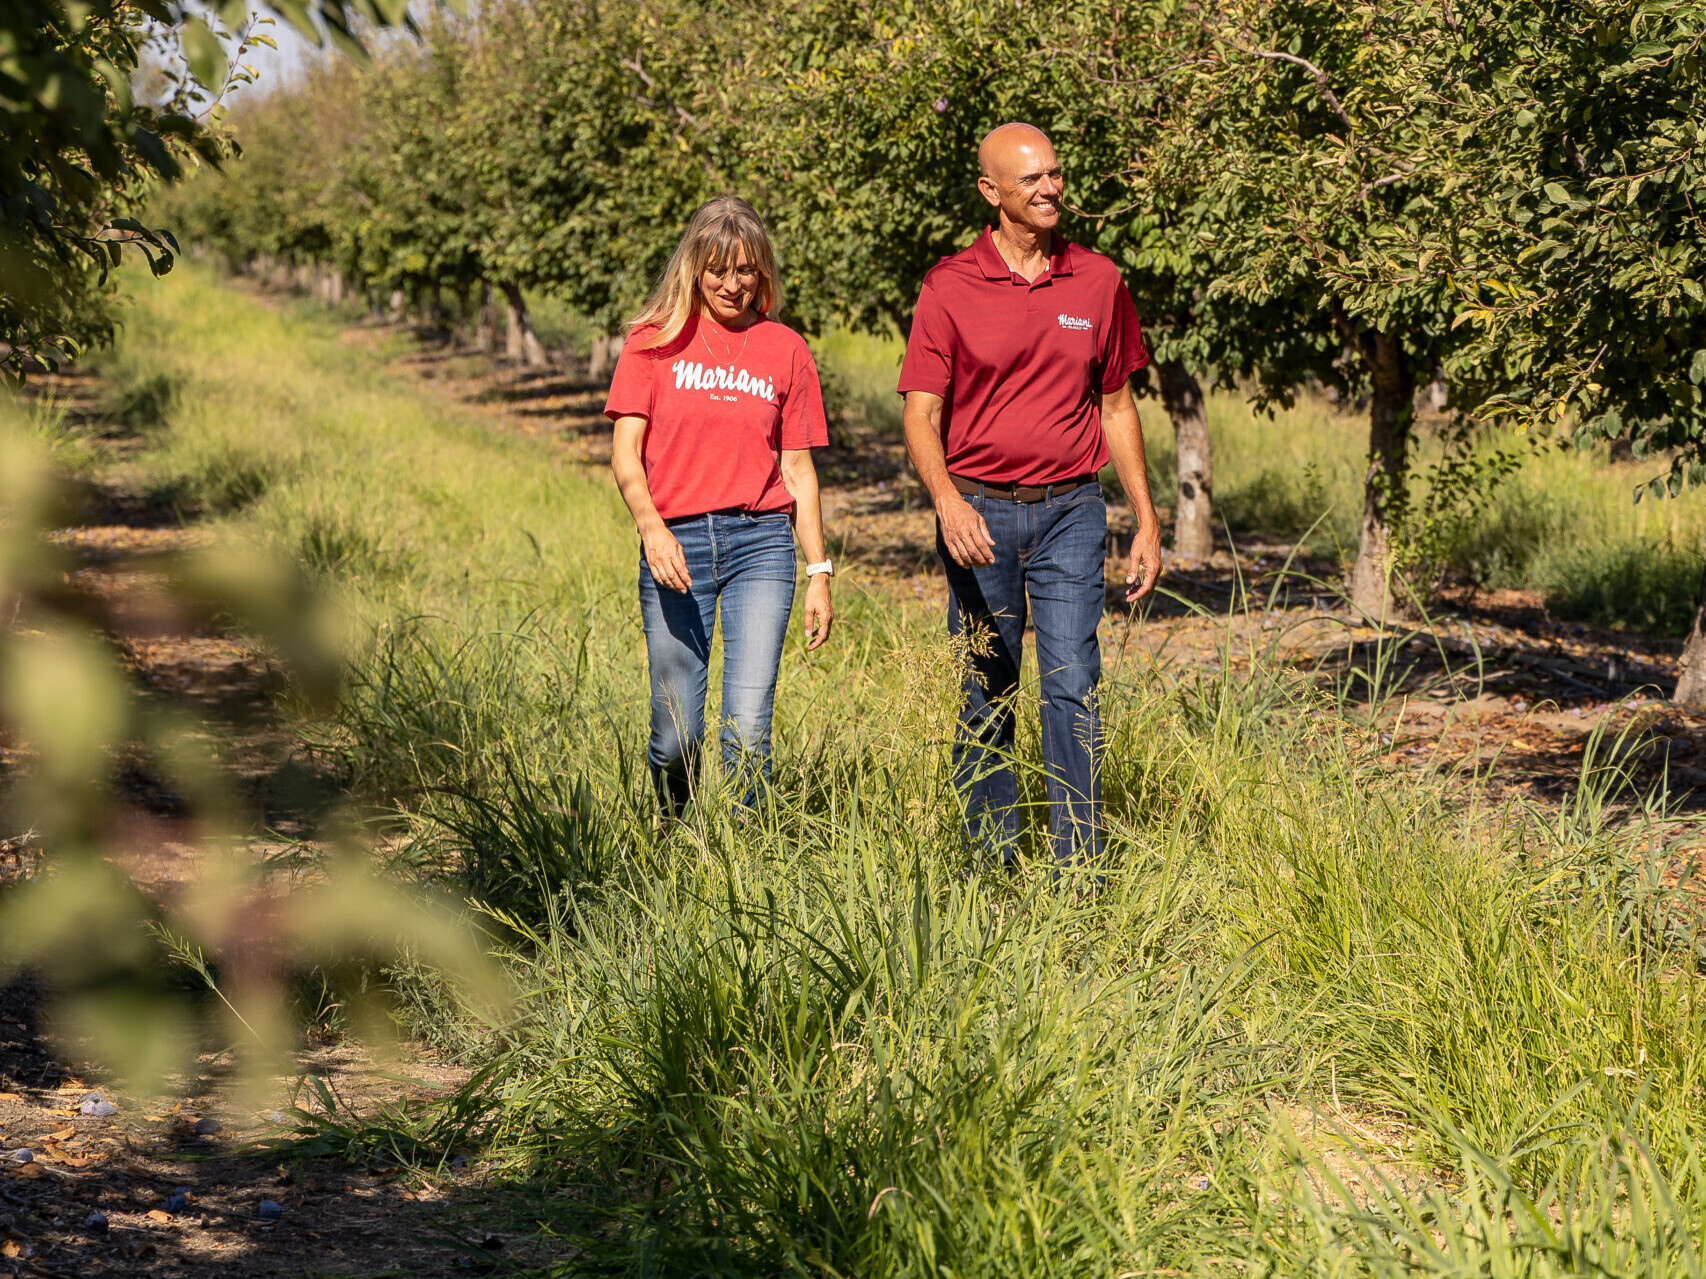 George Souza Jr, President of Mariani Family with Natalie Mariani Kling, Director of Strategic Marketing walking through their Yuba City Prune Orchard August 2022 Photography by Hilary Rance for California Prunes